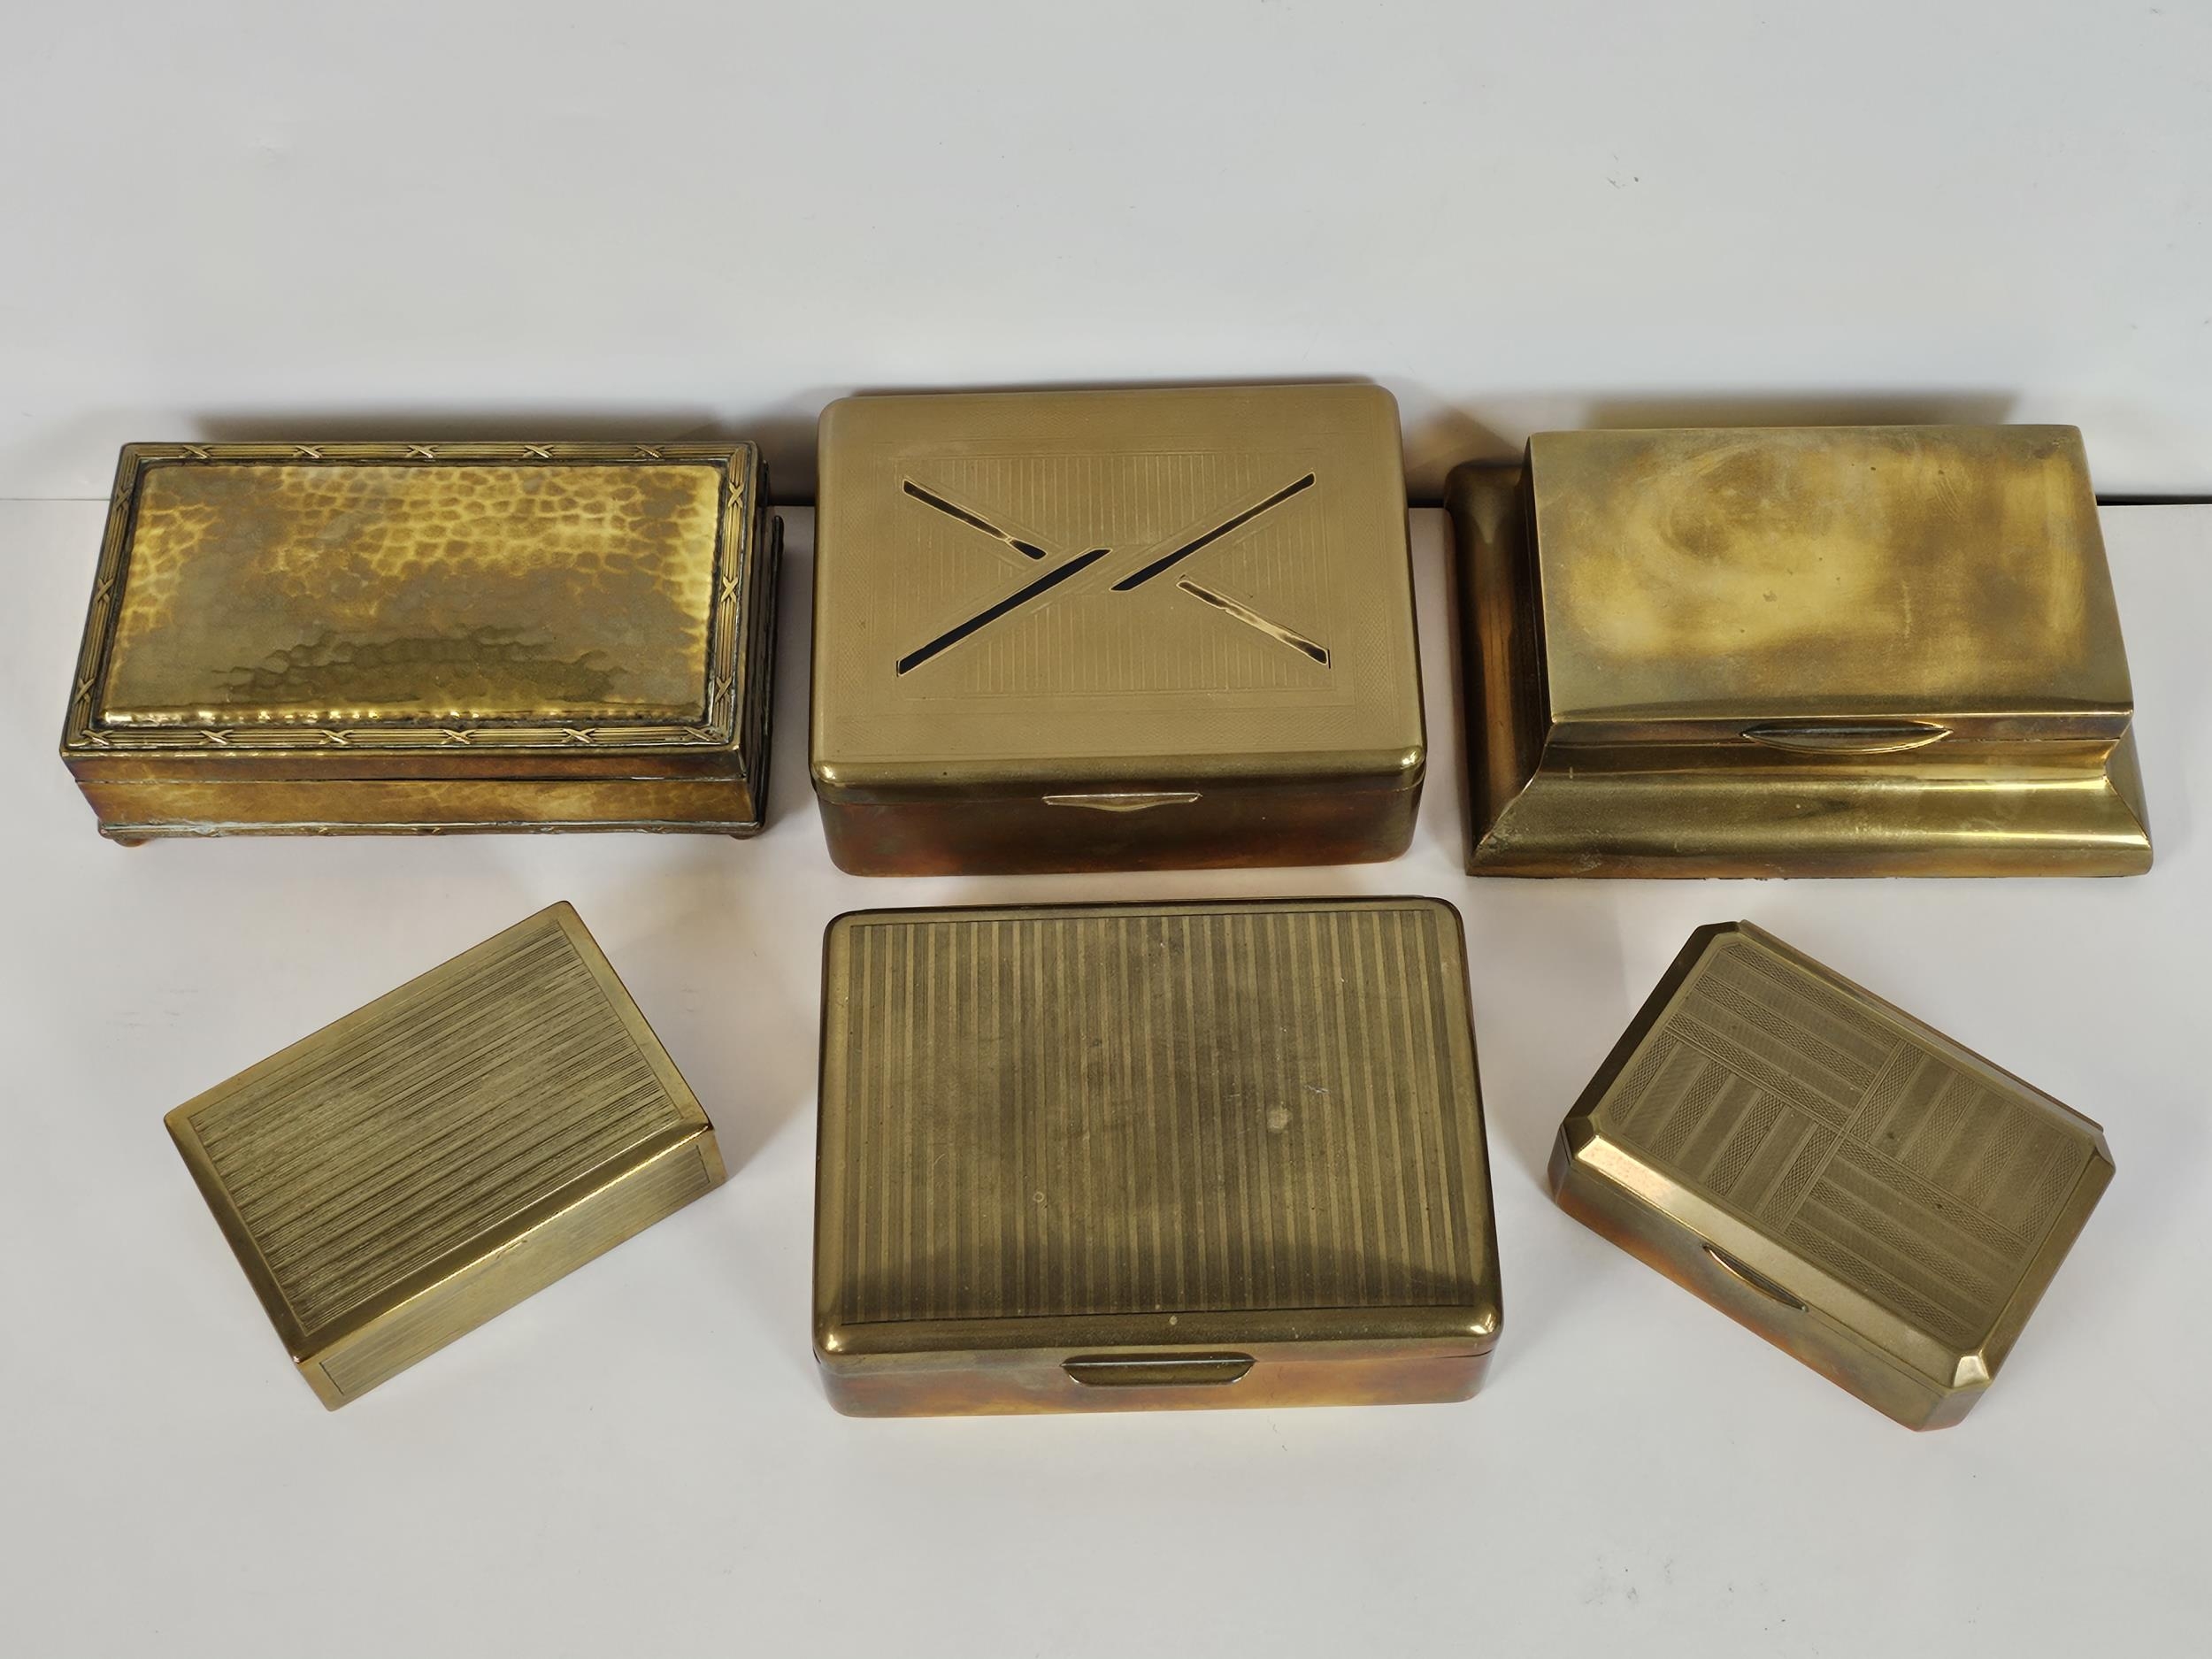 A good collection of brass boxes including a Trench Art cigarette box.